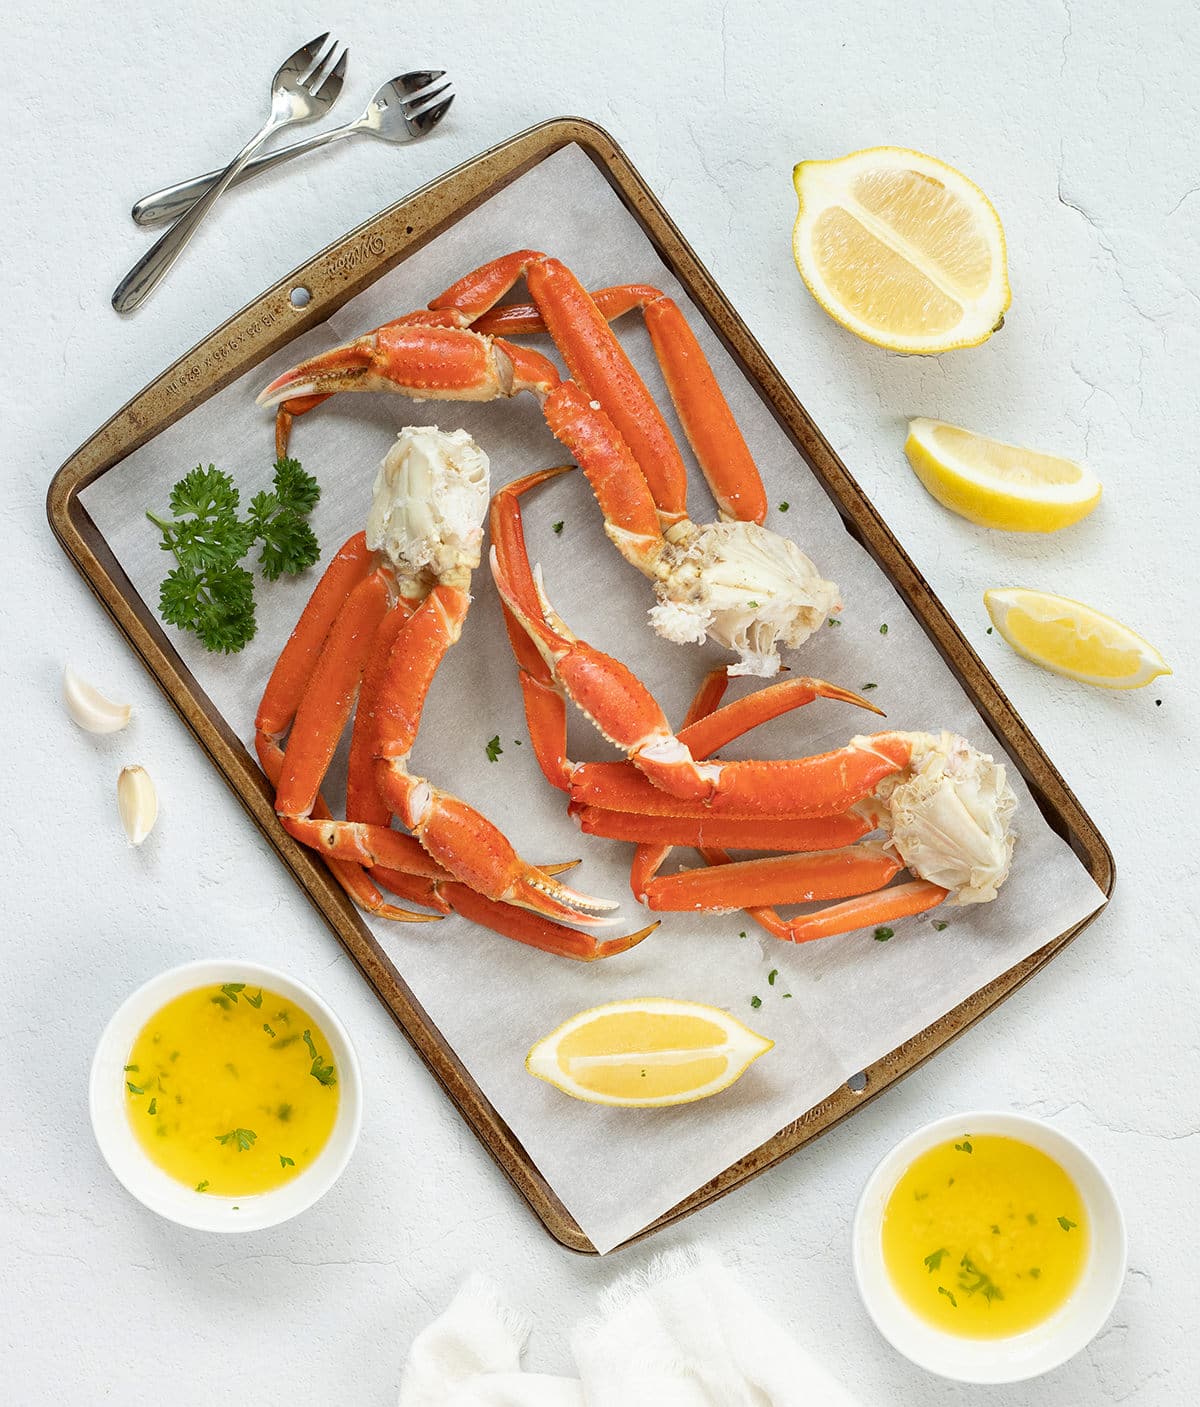 Crab legs on a baking sheet with garlic butter.